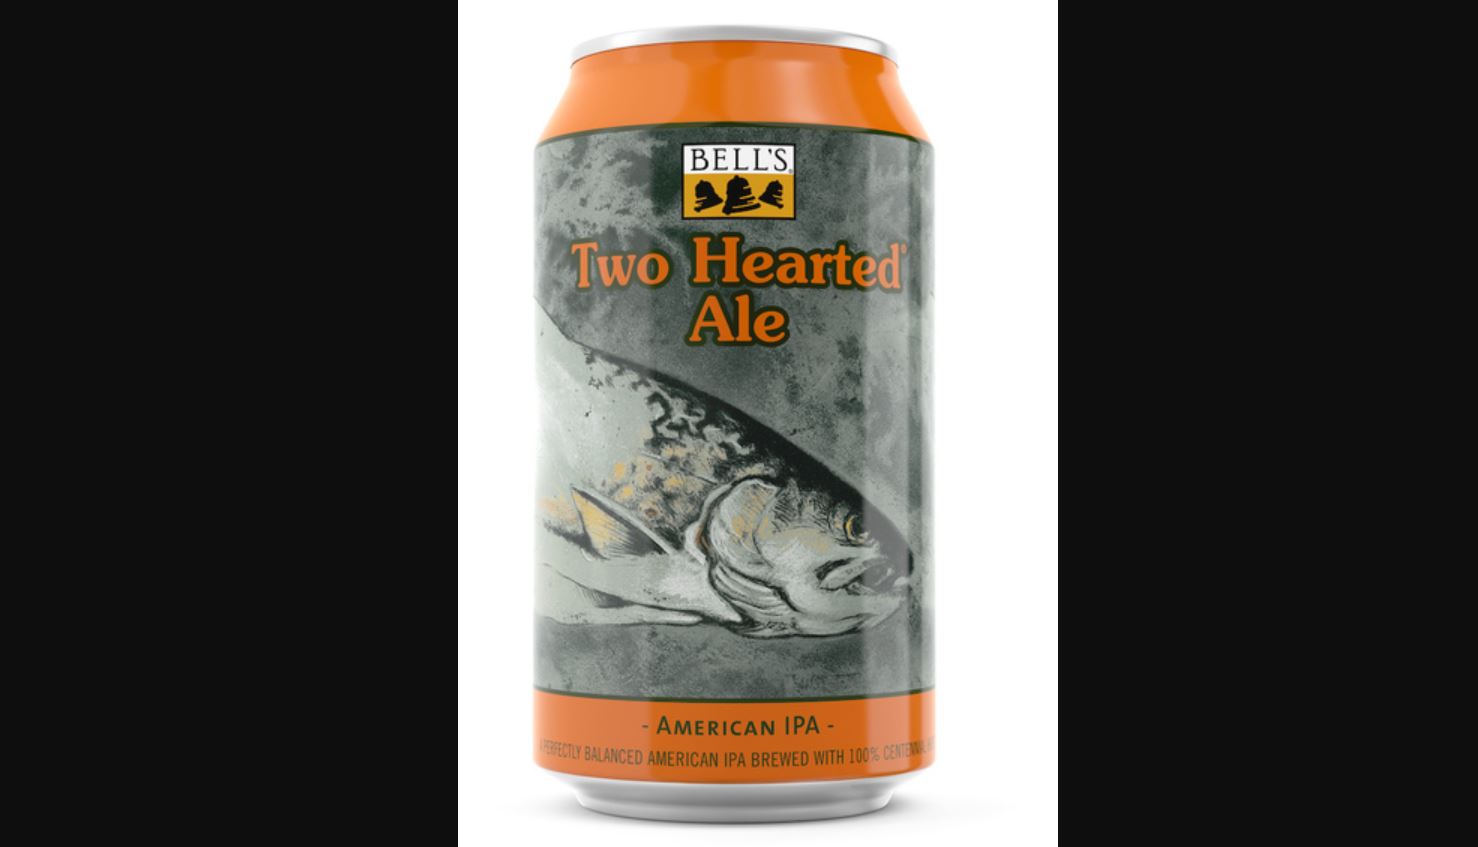 Bell’s Two Hearted Ale